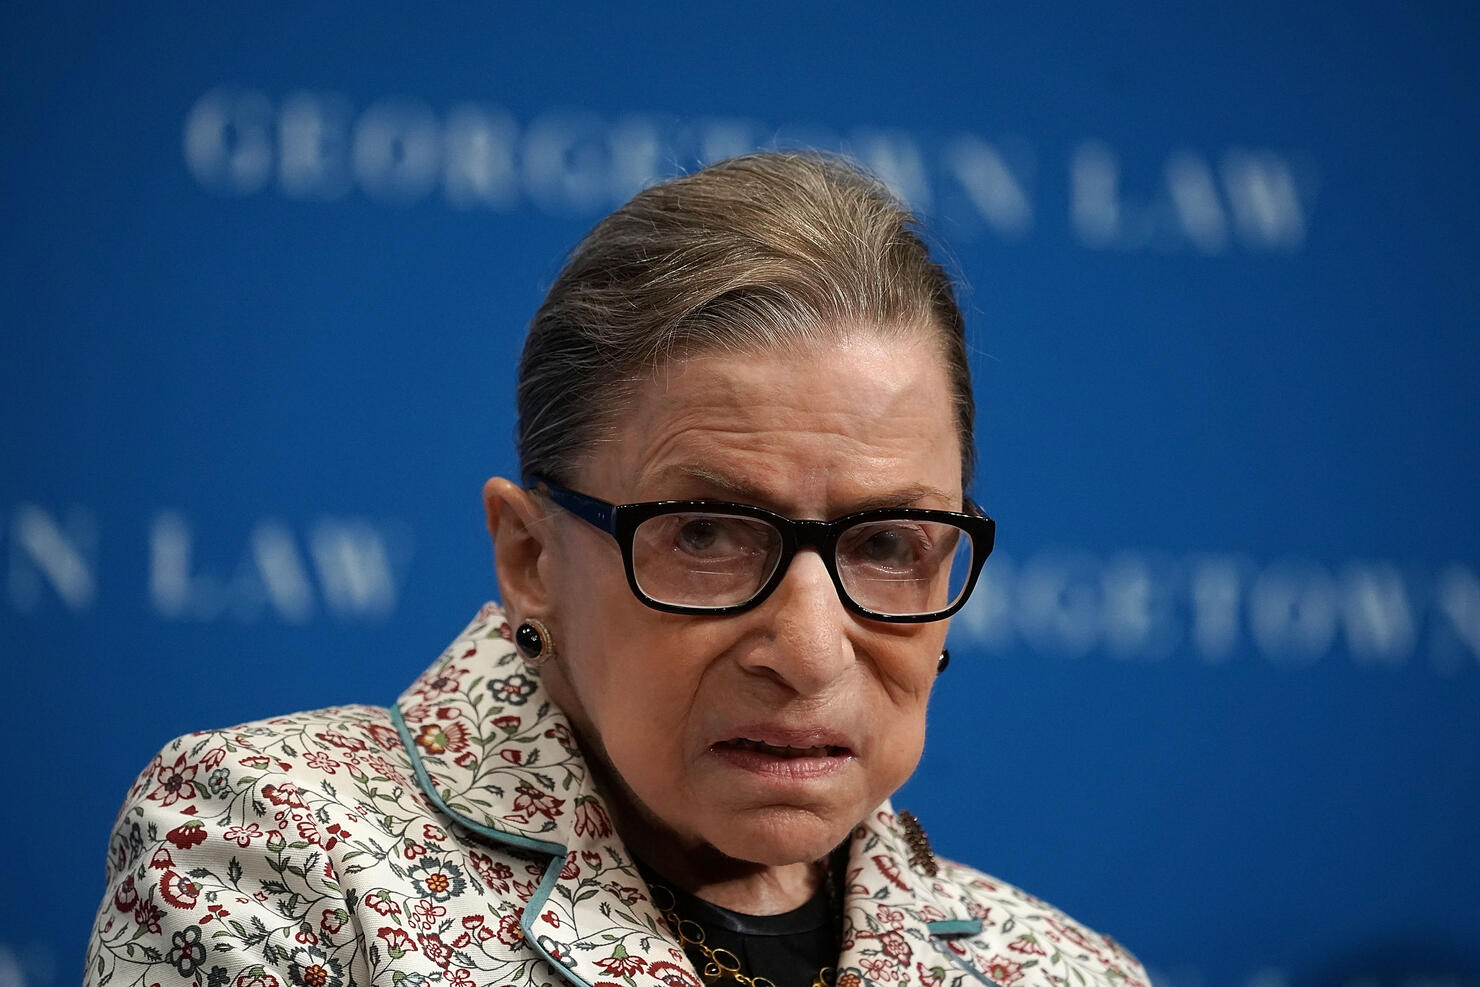 U.S. Supreme Court Justice Ruth Bader Ginsburg participates in a lecture September 26, 2018 at Georgetown University Law Center in Washington, DC. 